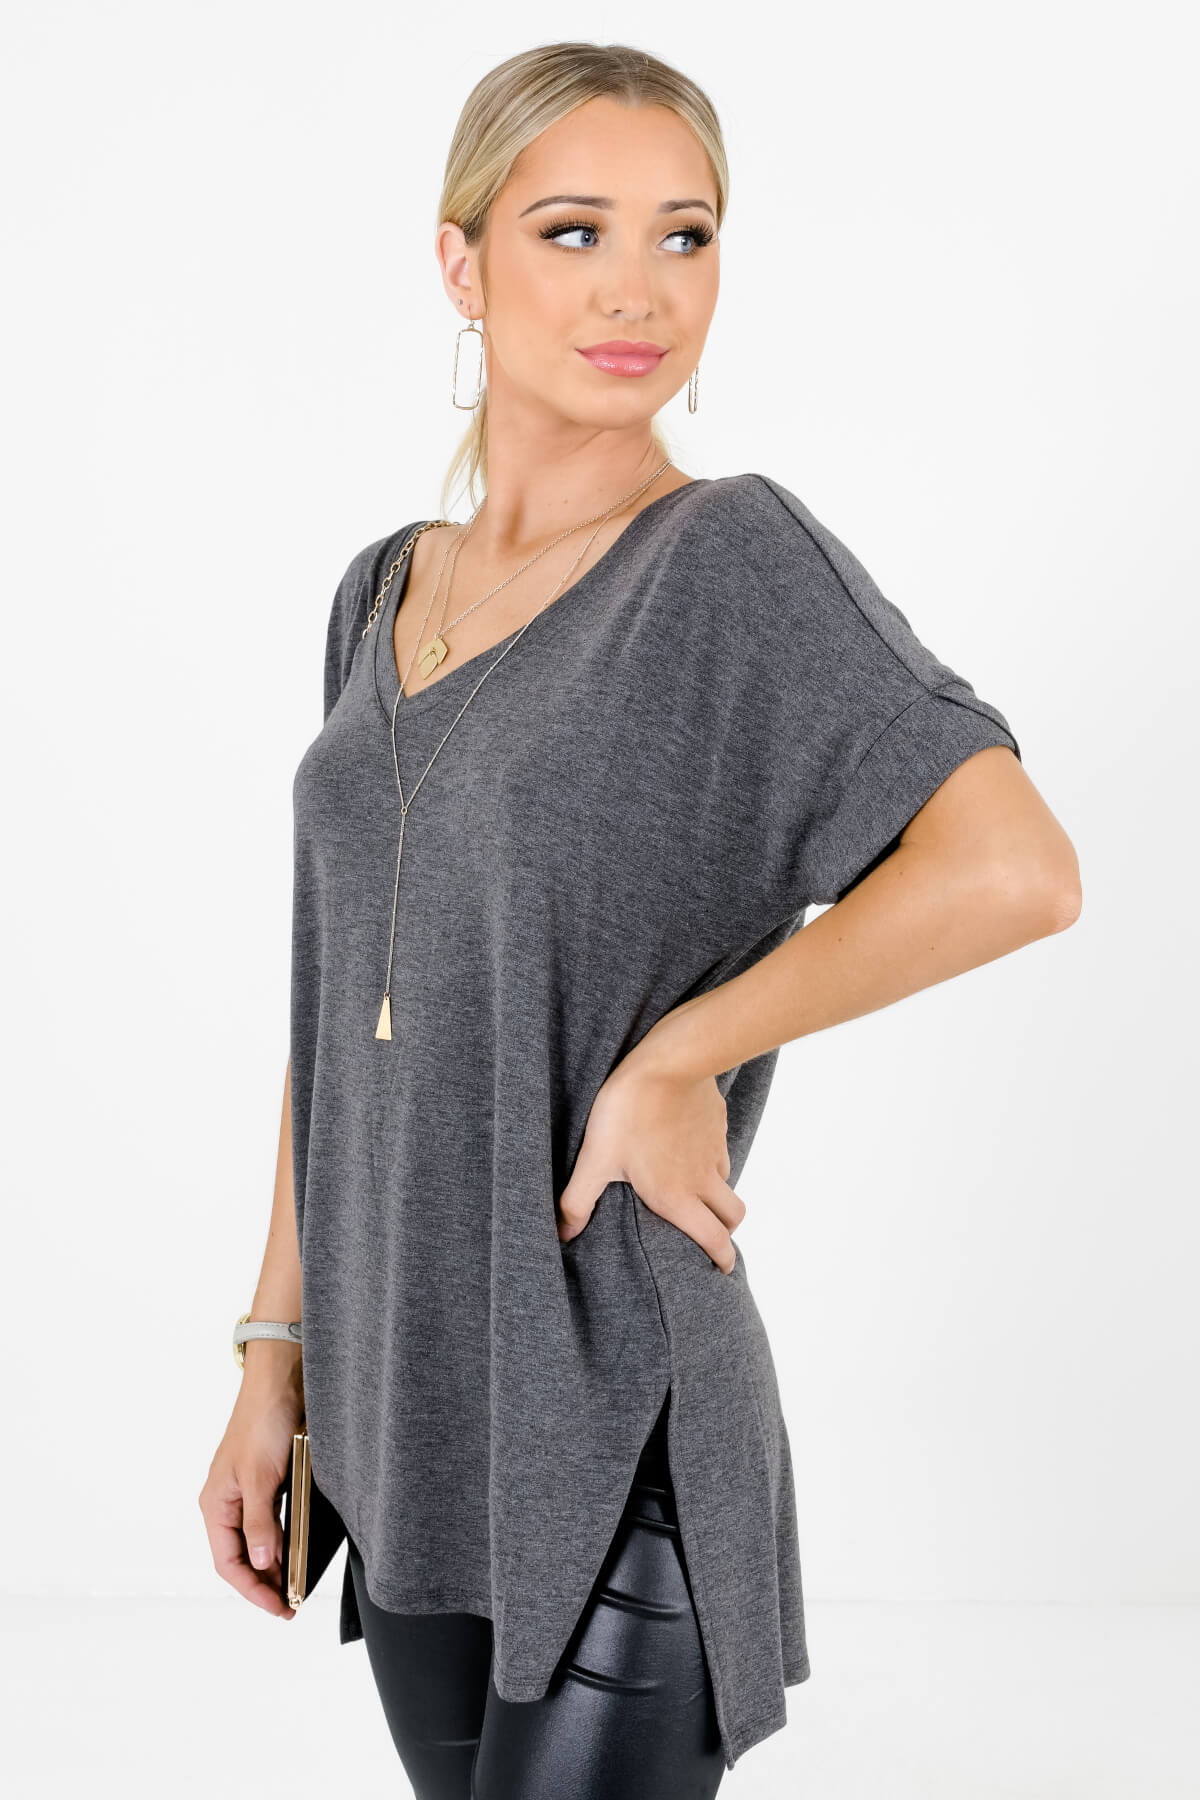 Charcoal Gray Layering Boutique Tops for Women